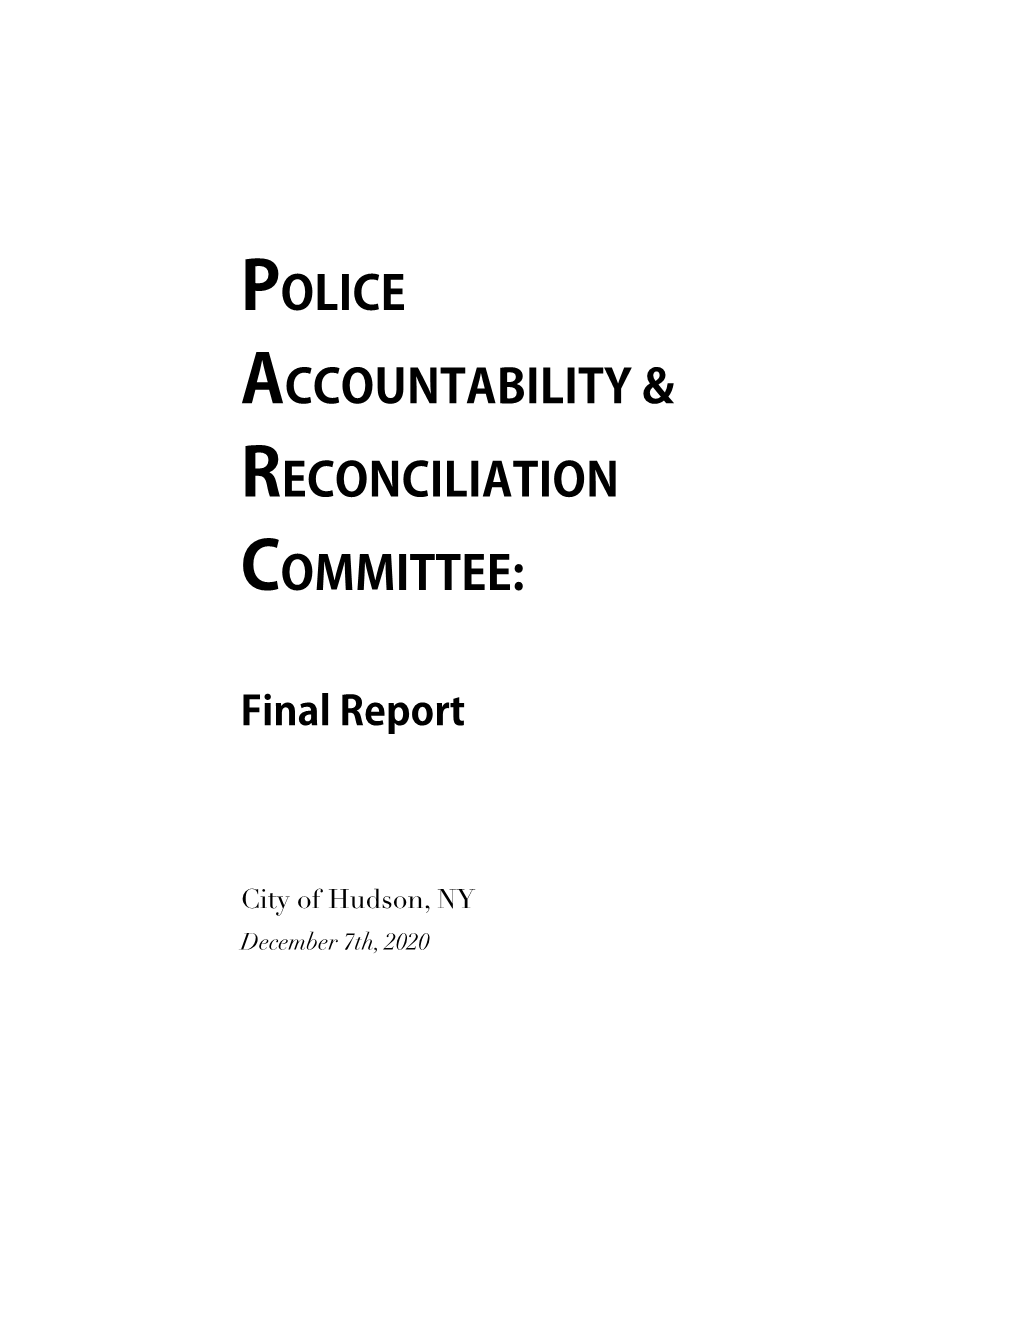 Police Accountability & Reconciliation Committee